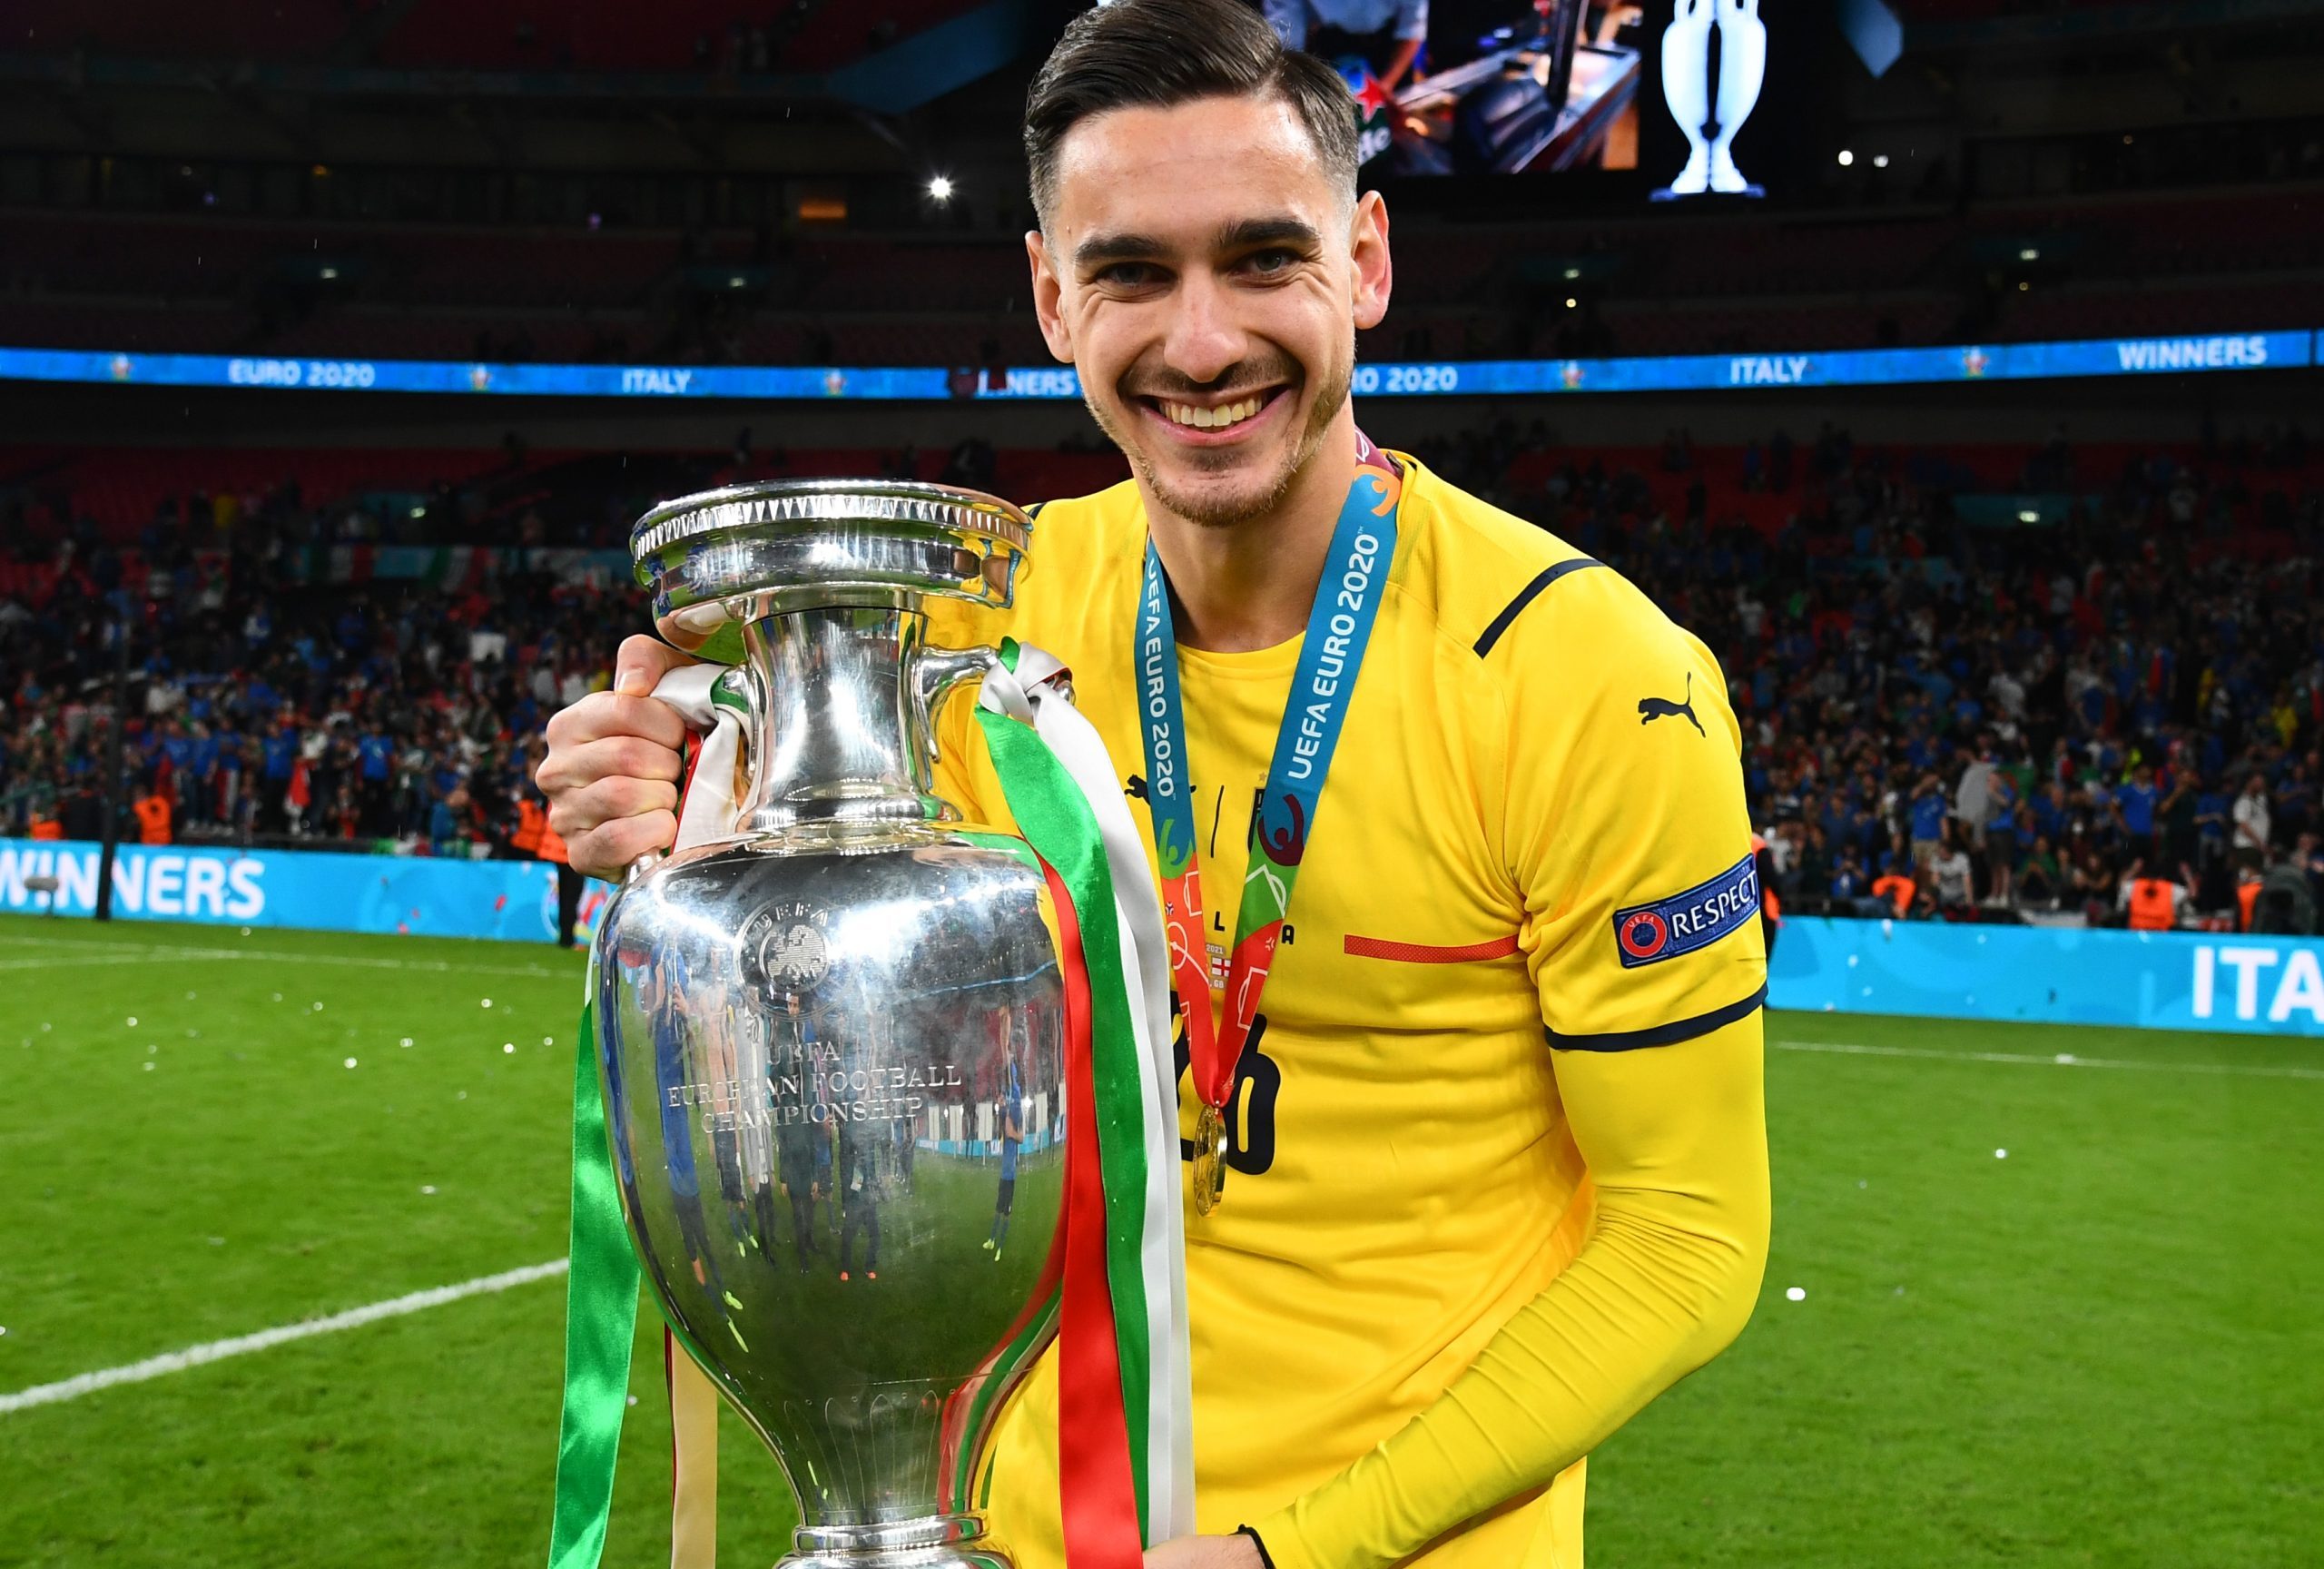 Alex Meret of Italy celebrates with The Henri Delaunay Trophy following his team's victory in the UEFA Euro 2020 Championship Final against England.